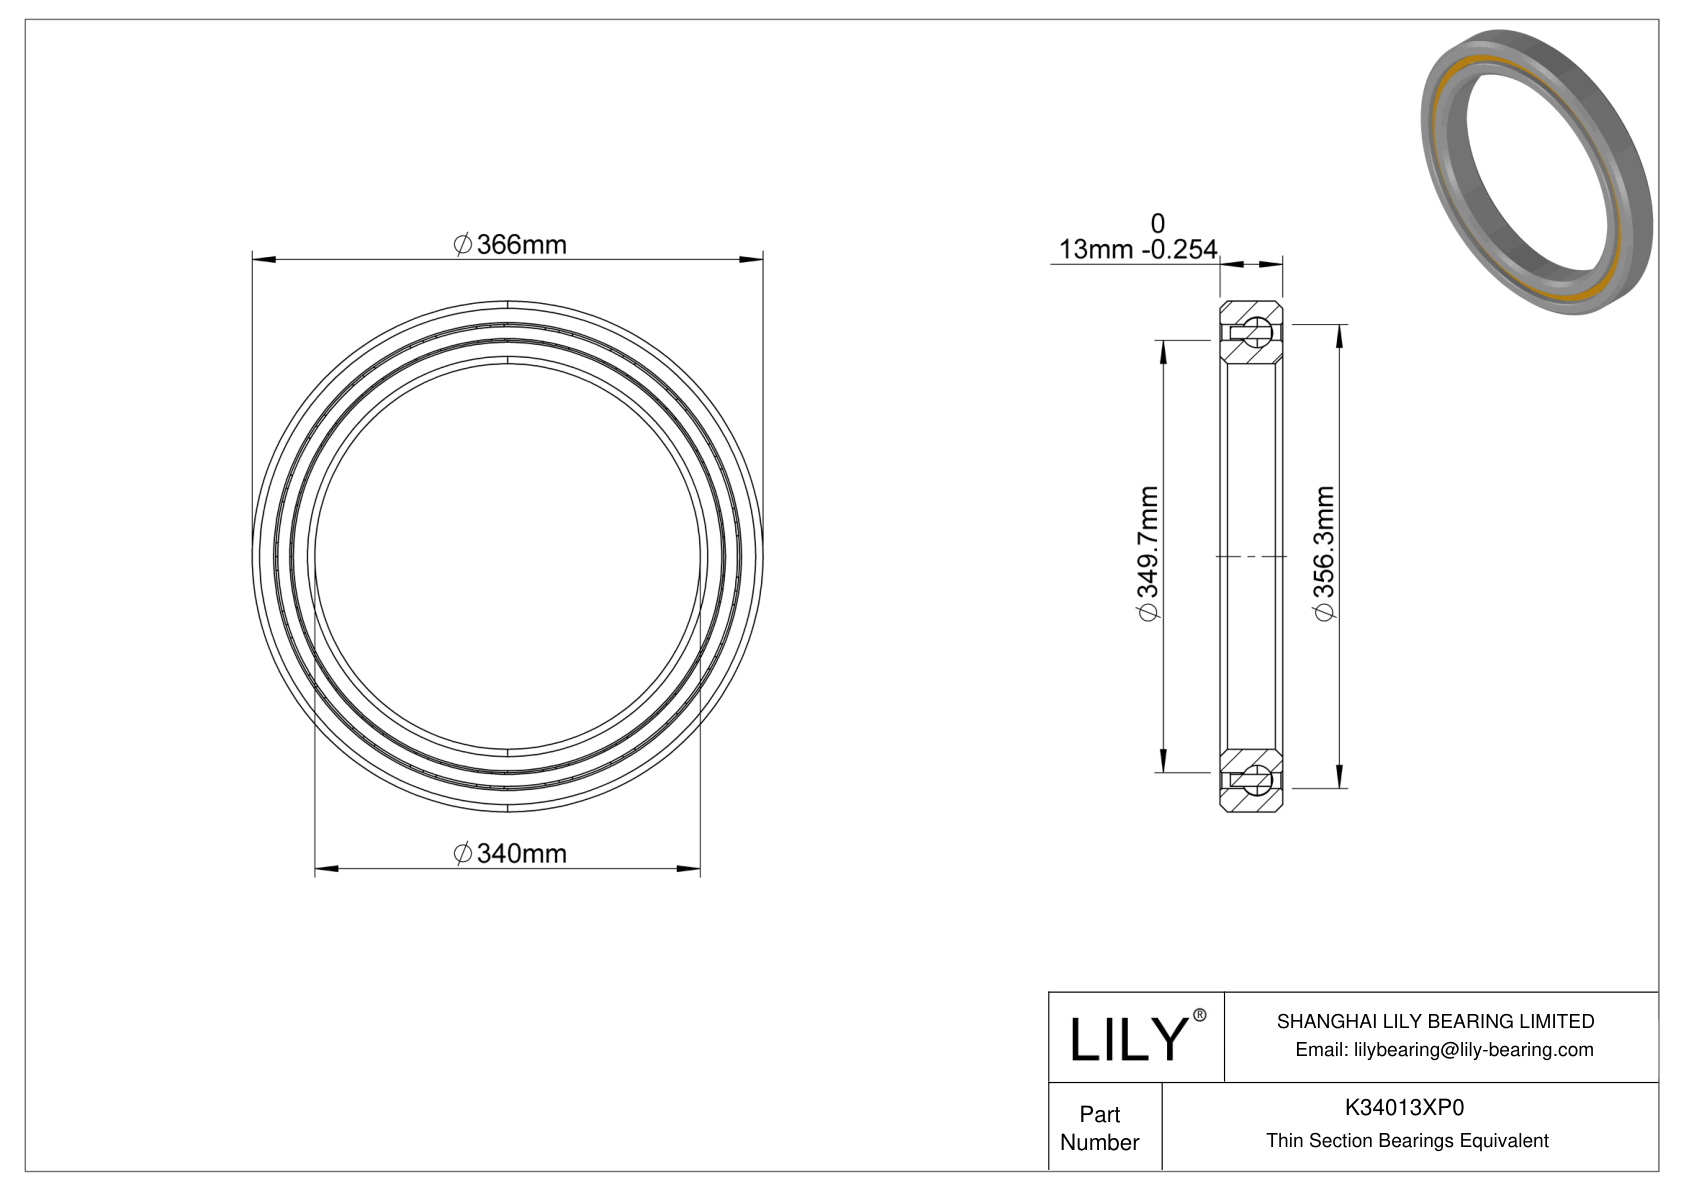 K34013XP0 Constant Section (CS) Bearings cad drawing